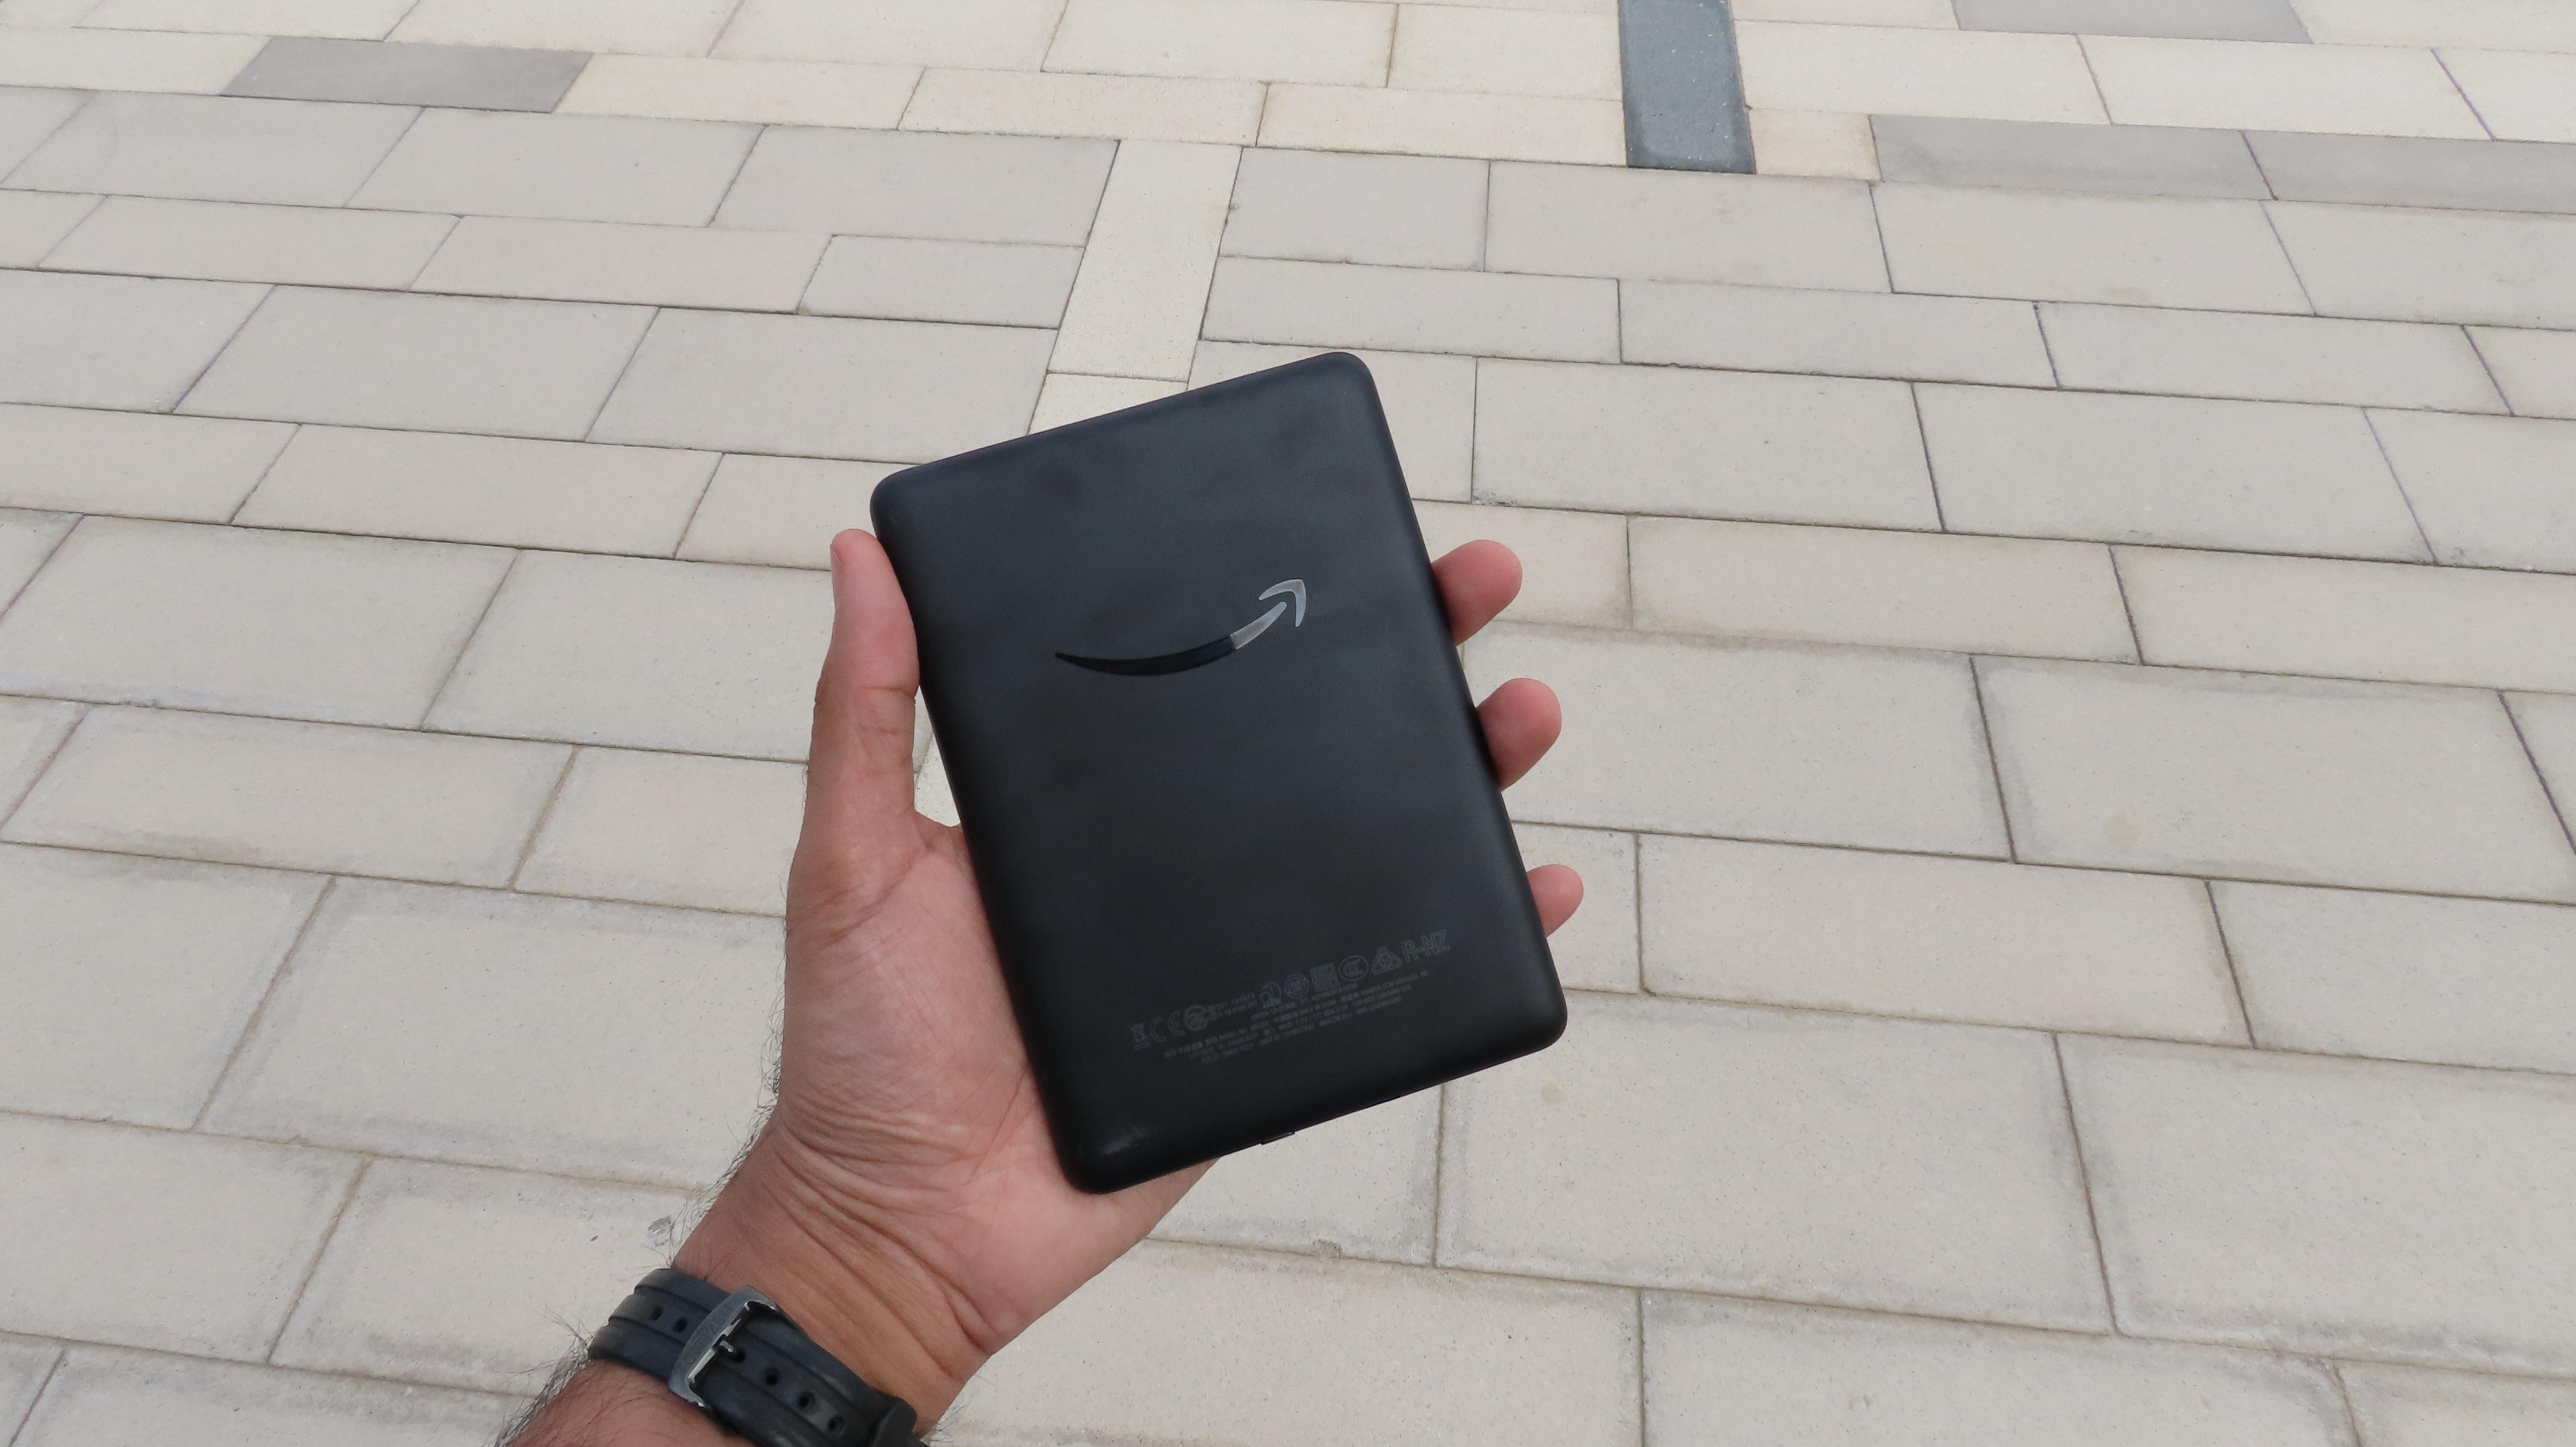 A Kindle (2019) held in someone's hand, shown from the back